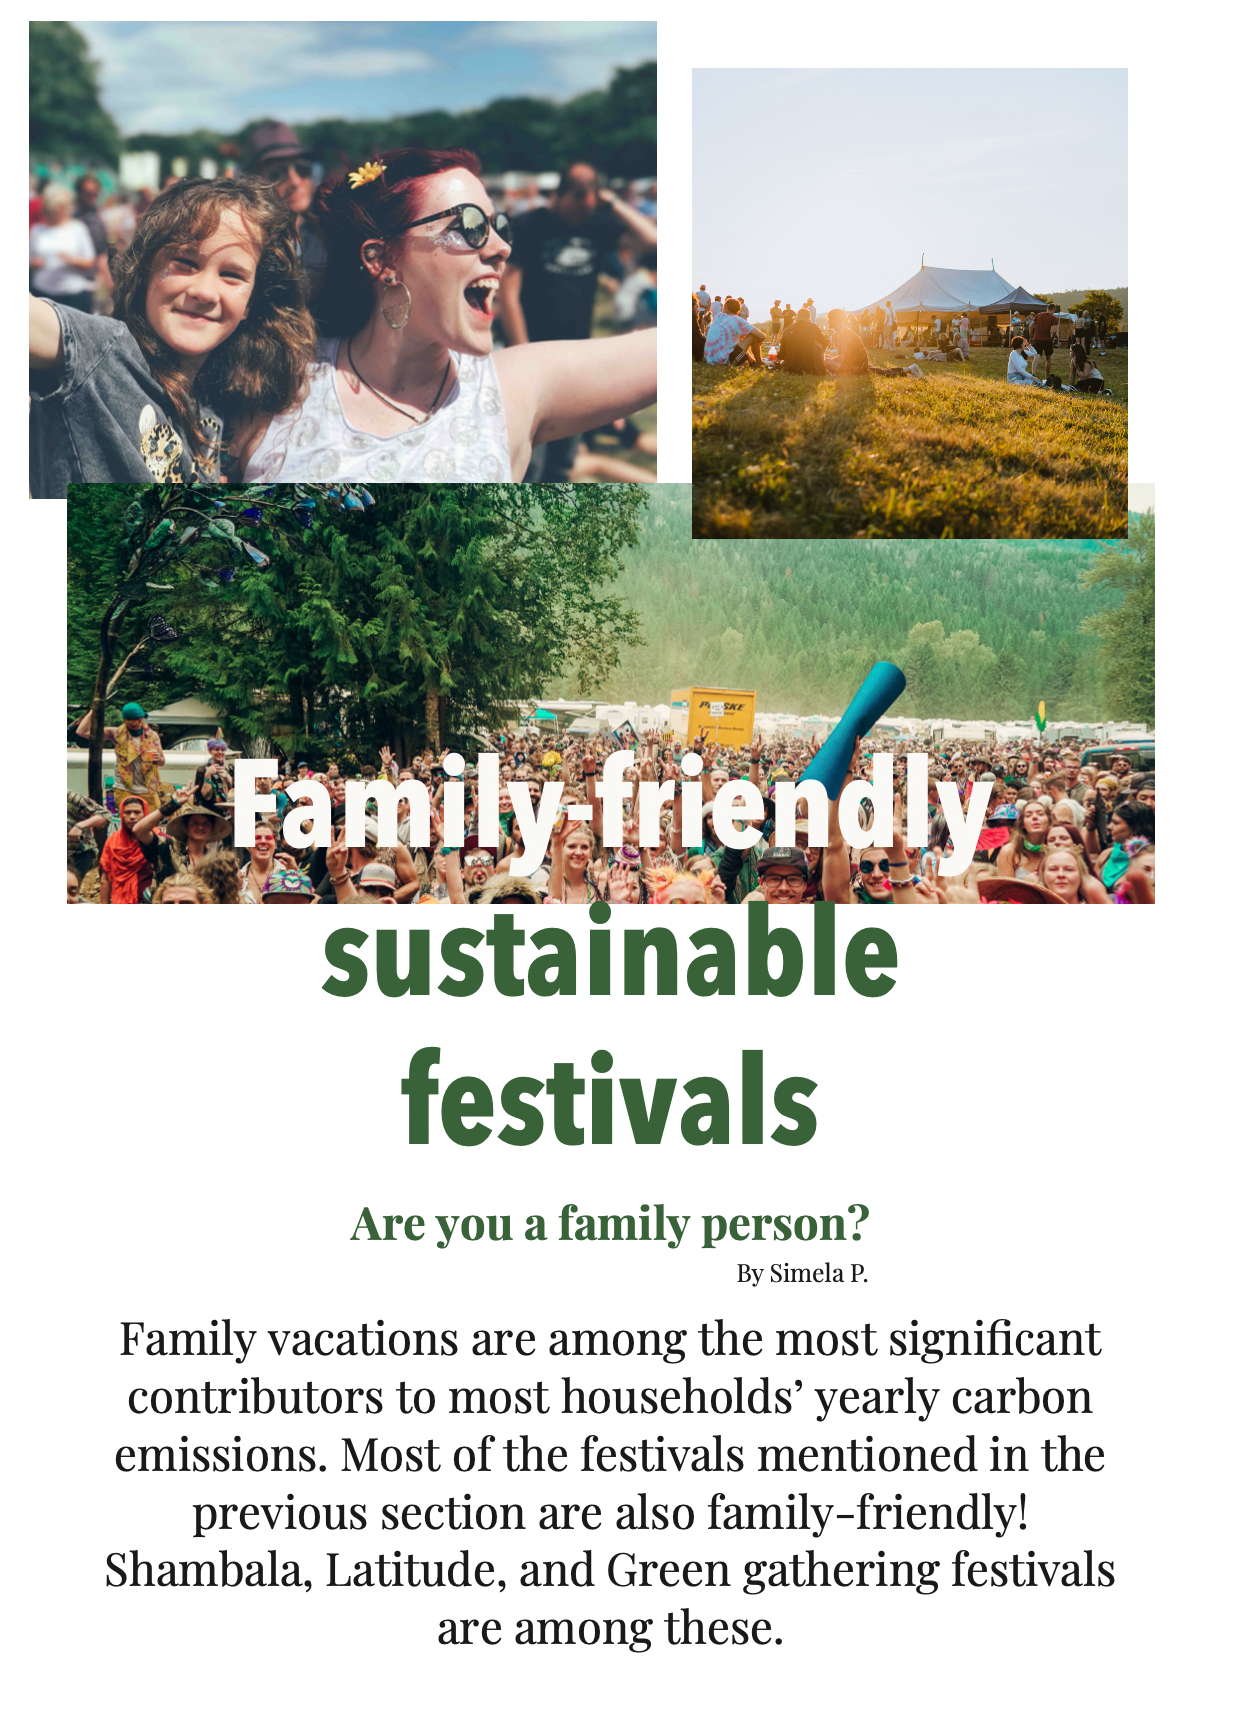 sustainable
festivals

Are you a family person?

By Simela P.

Family vacations are among the most significant
contributors to most households’ yearly carbon
emissions. Most of the festivals mentioned in the
previous section are also family-friendly!
Shambala, Latitude, and Green gathering festivals
are among these.